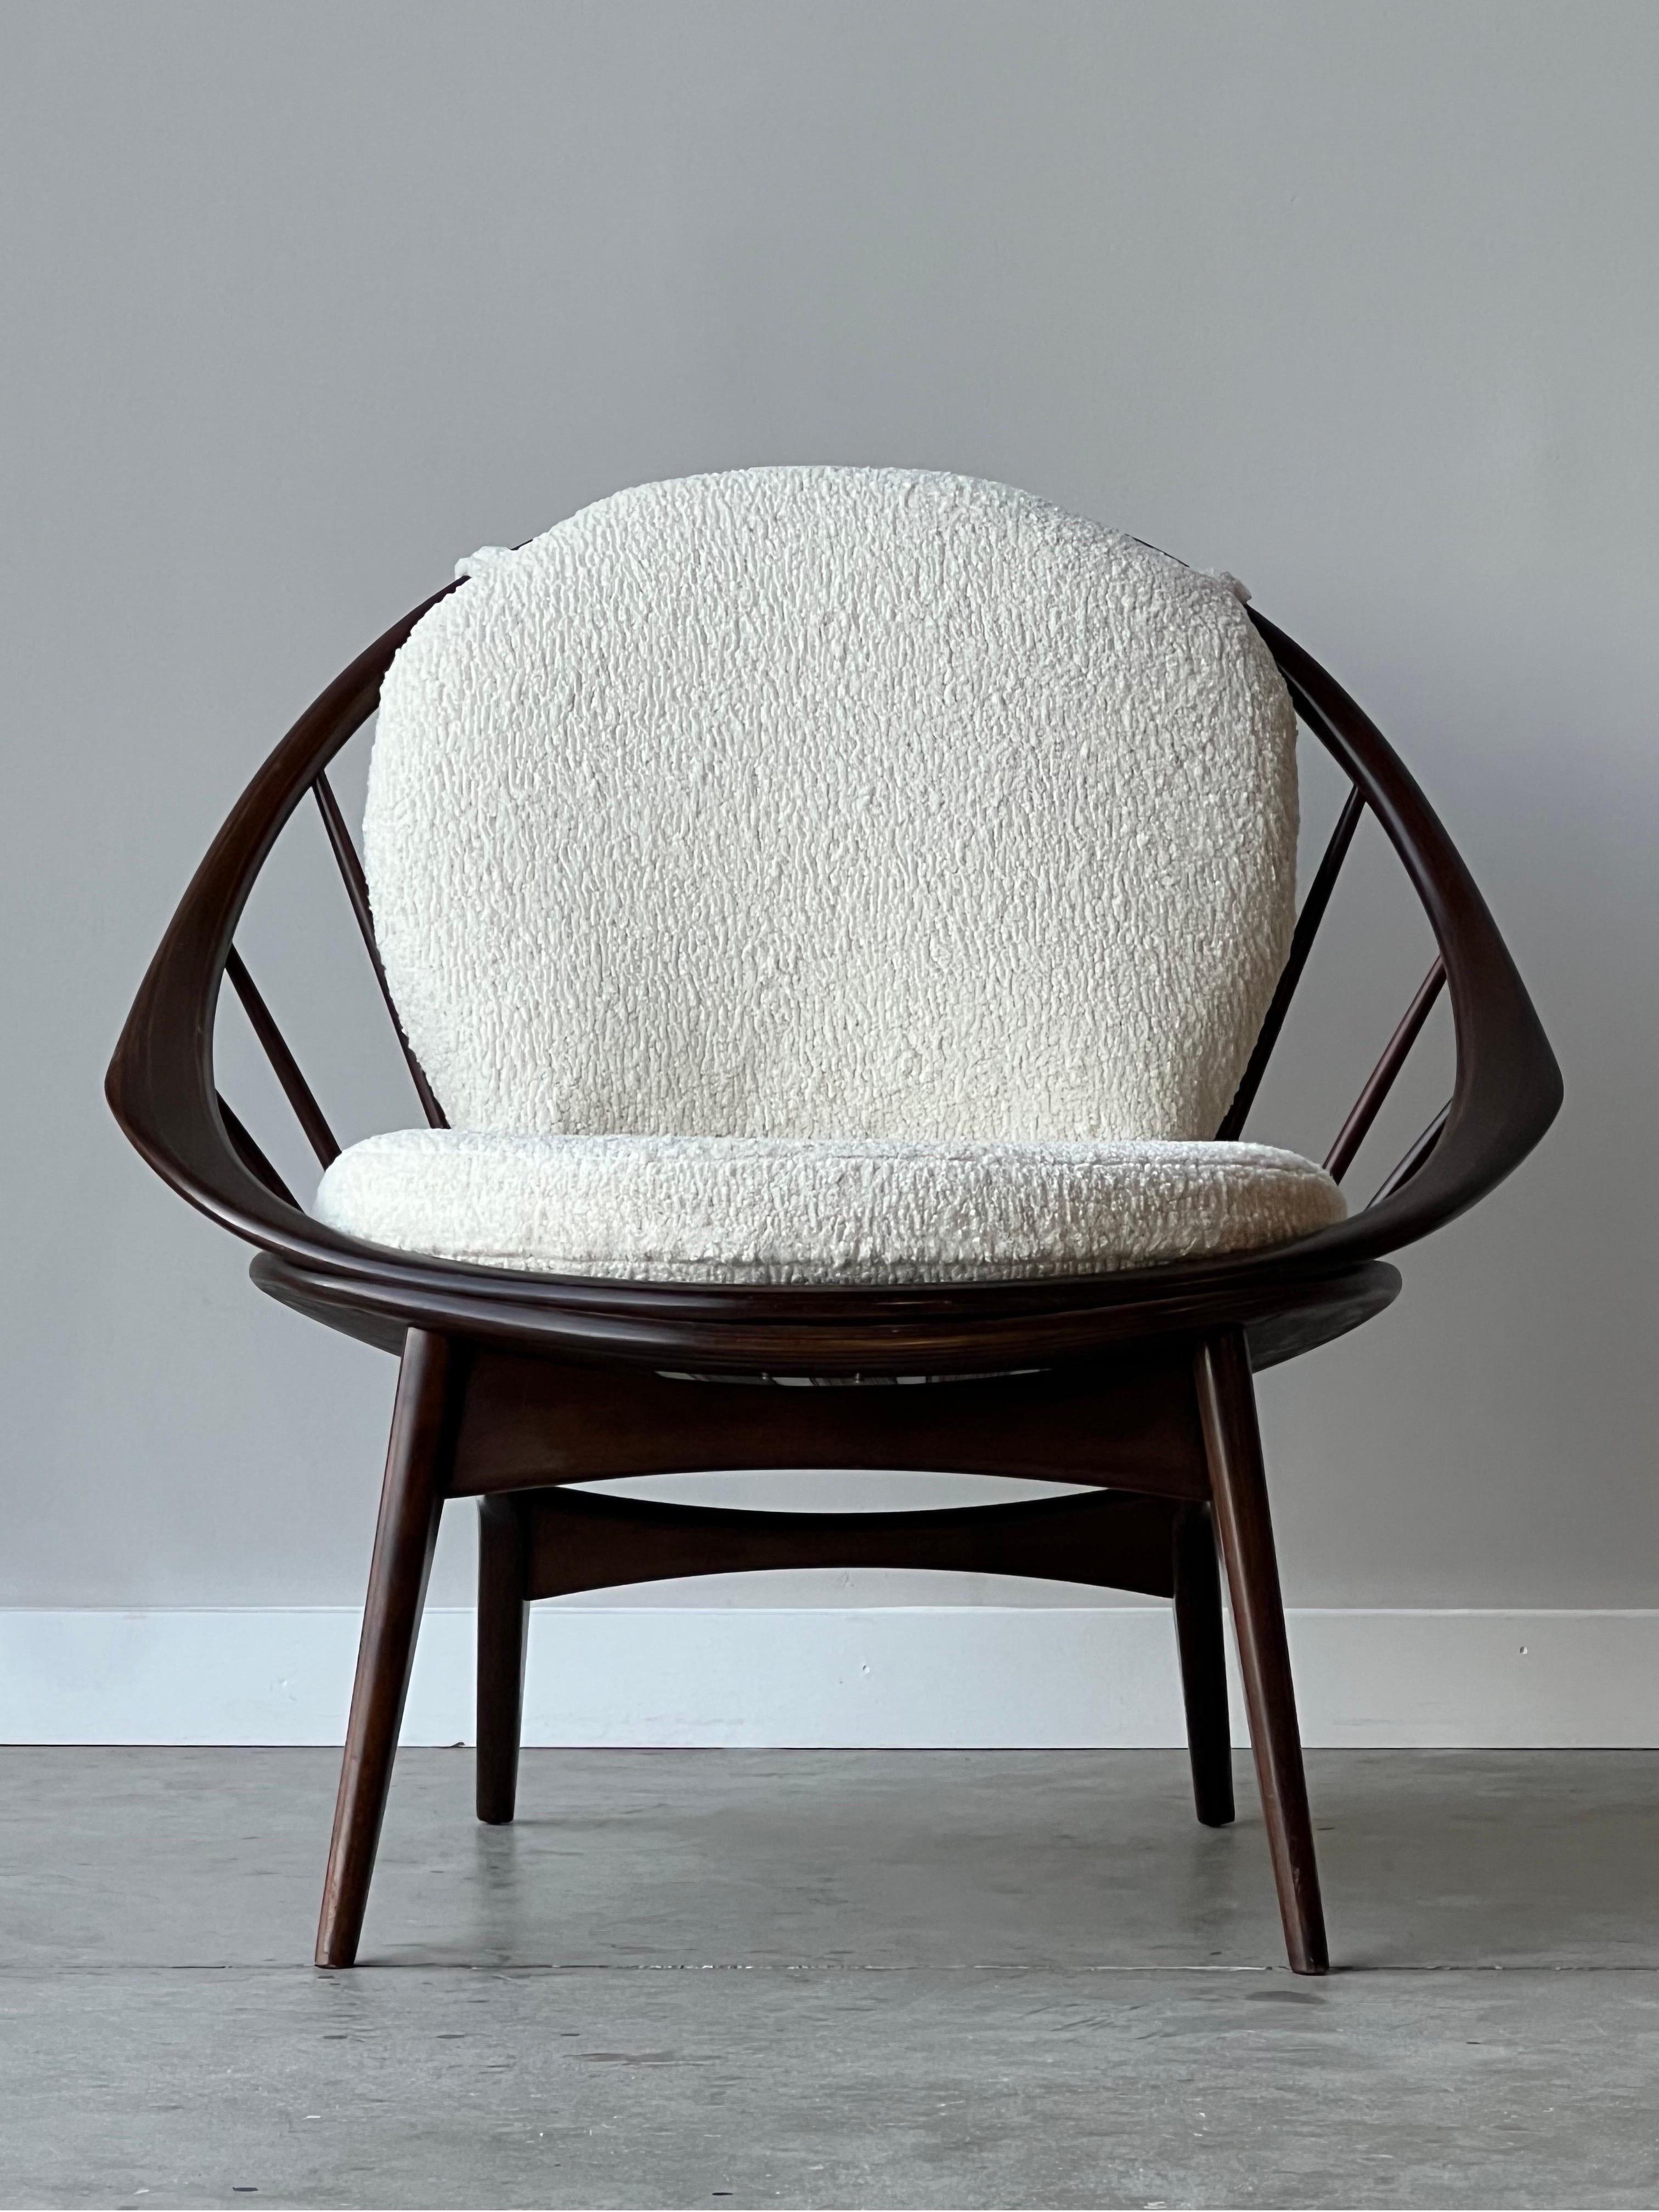 Mid-century chair designed by Ib Kofod Larsen for Selig, Denmark. Rightfully named the ‘Hoop’ chair for its unique circular frame and spindle back. Legs are flared creating a comfortable seated position and wonderful side profile. Newly